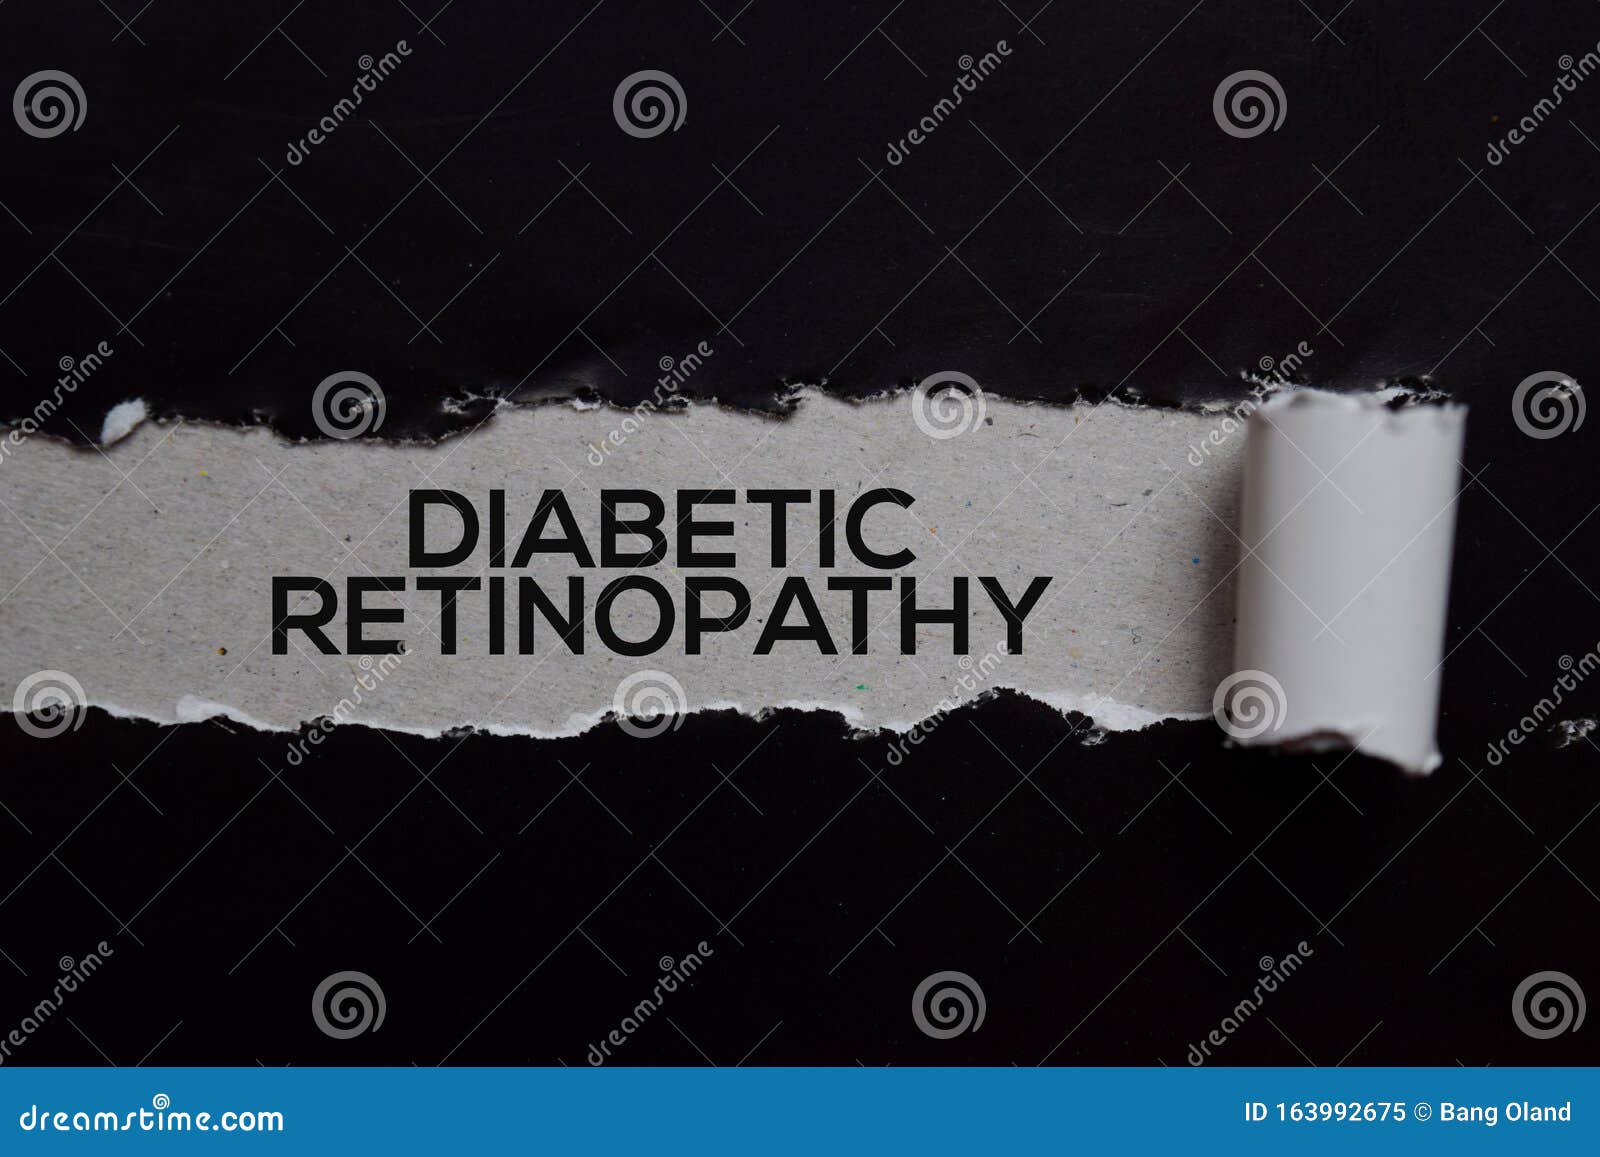 diabetic retinopathy text written in torn paper. medical concept